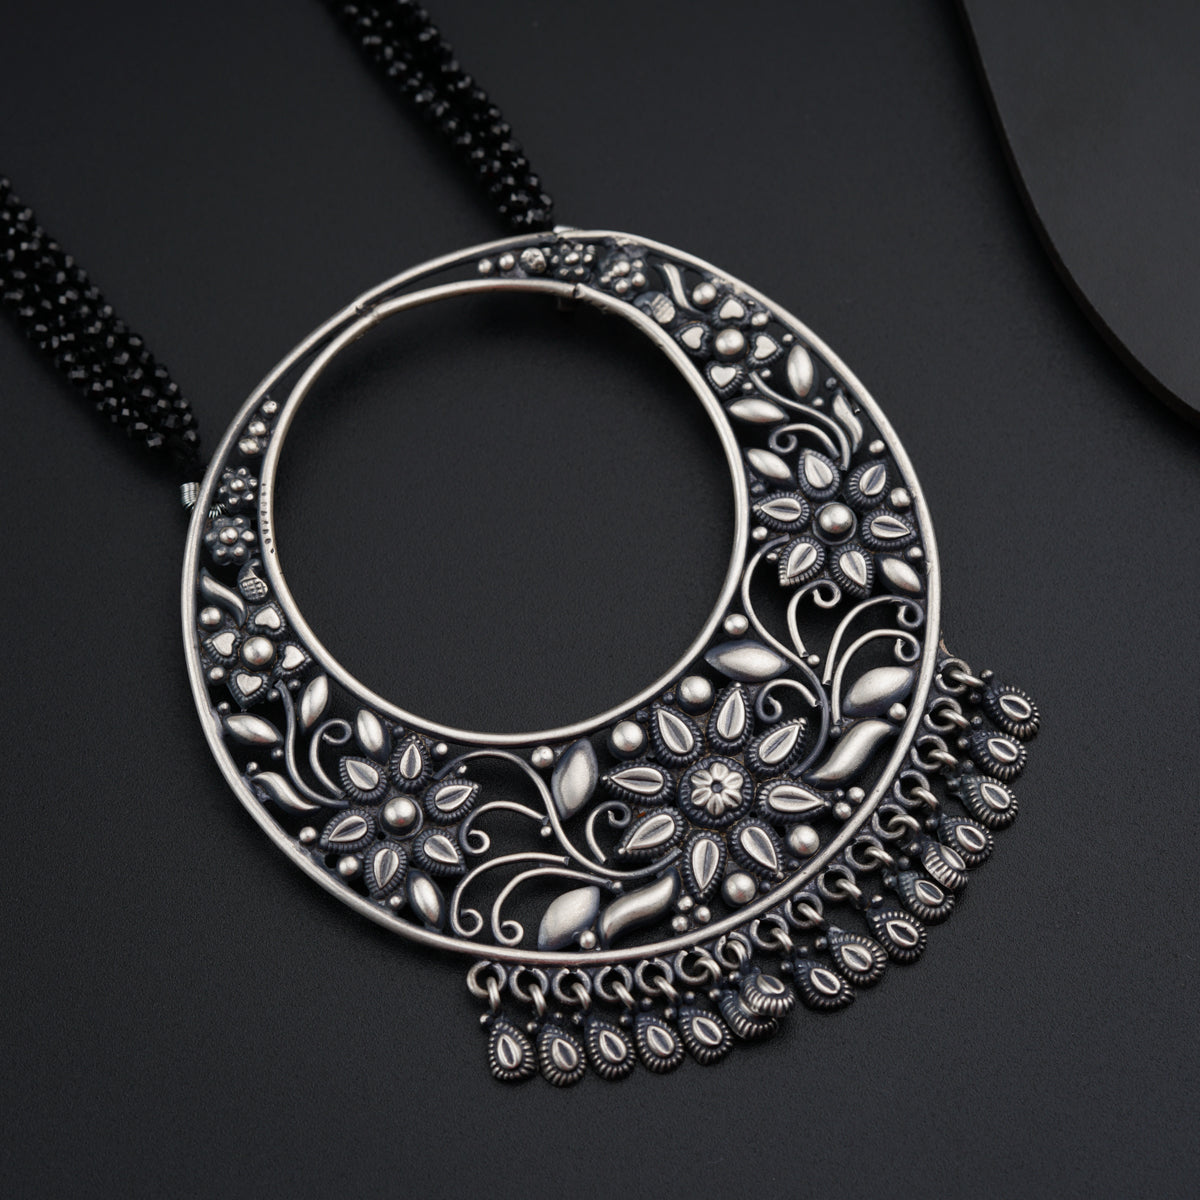 a necklace with a circular design on a black background